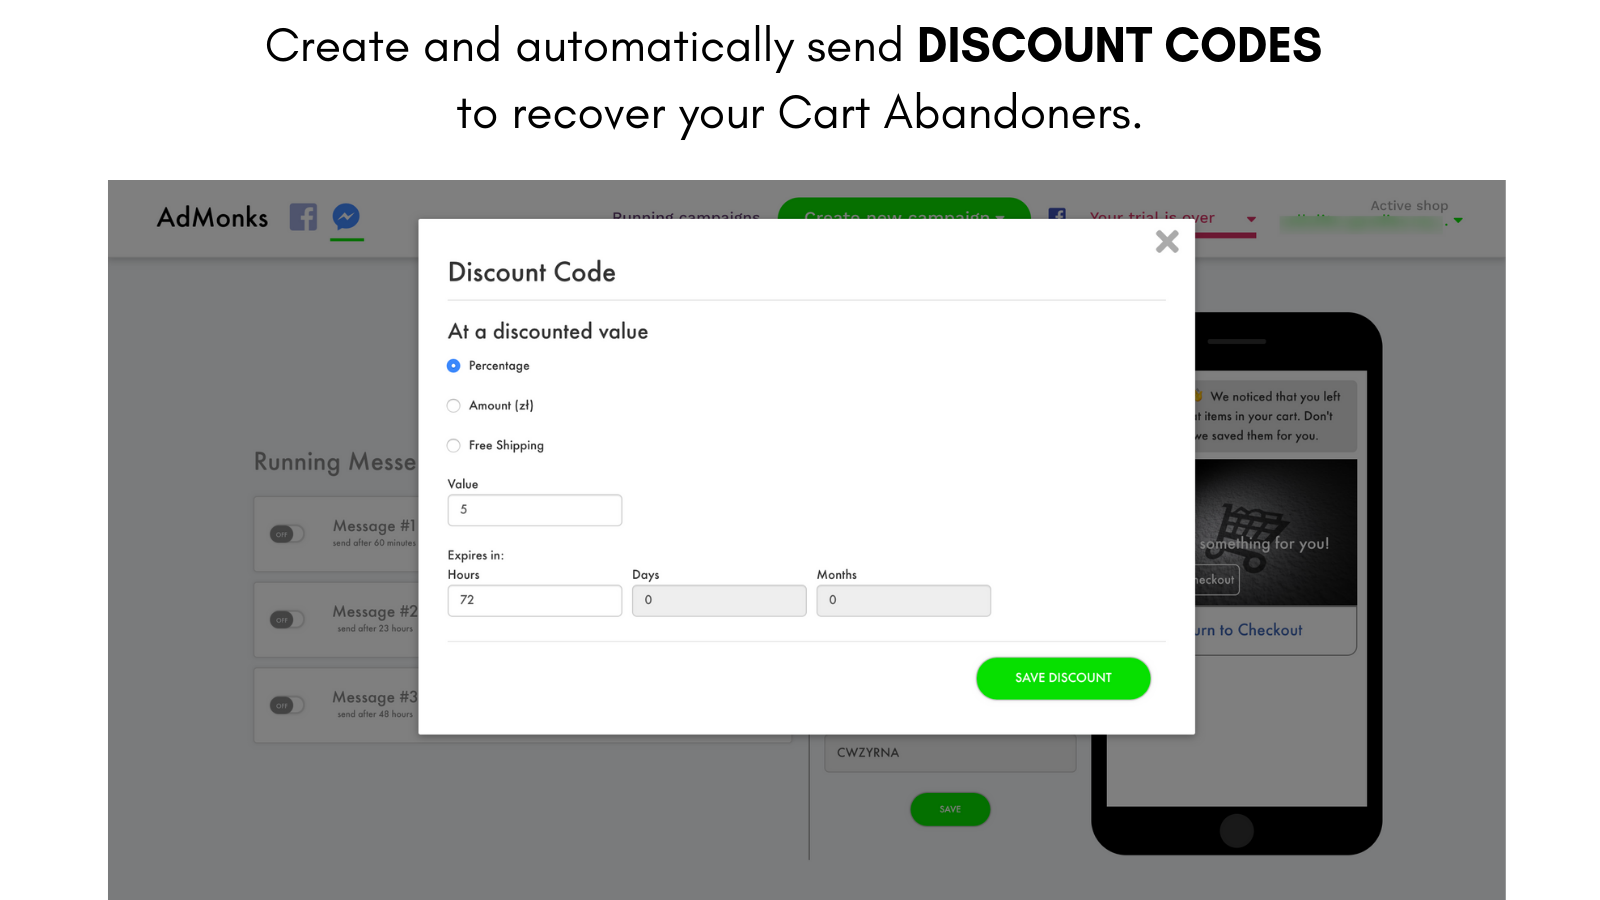 Set up your promo code to make your Messages irresistible